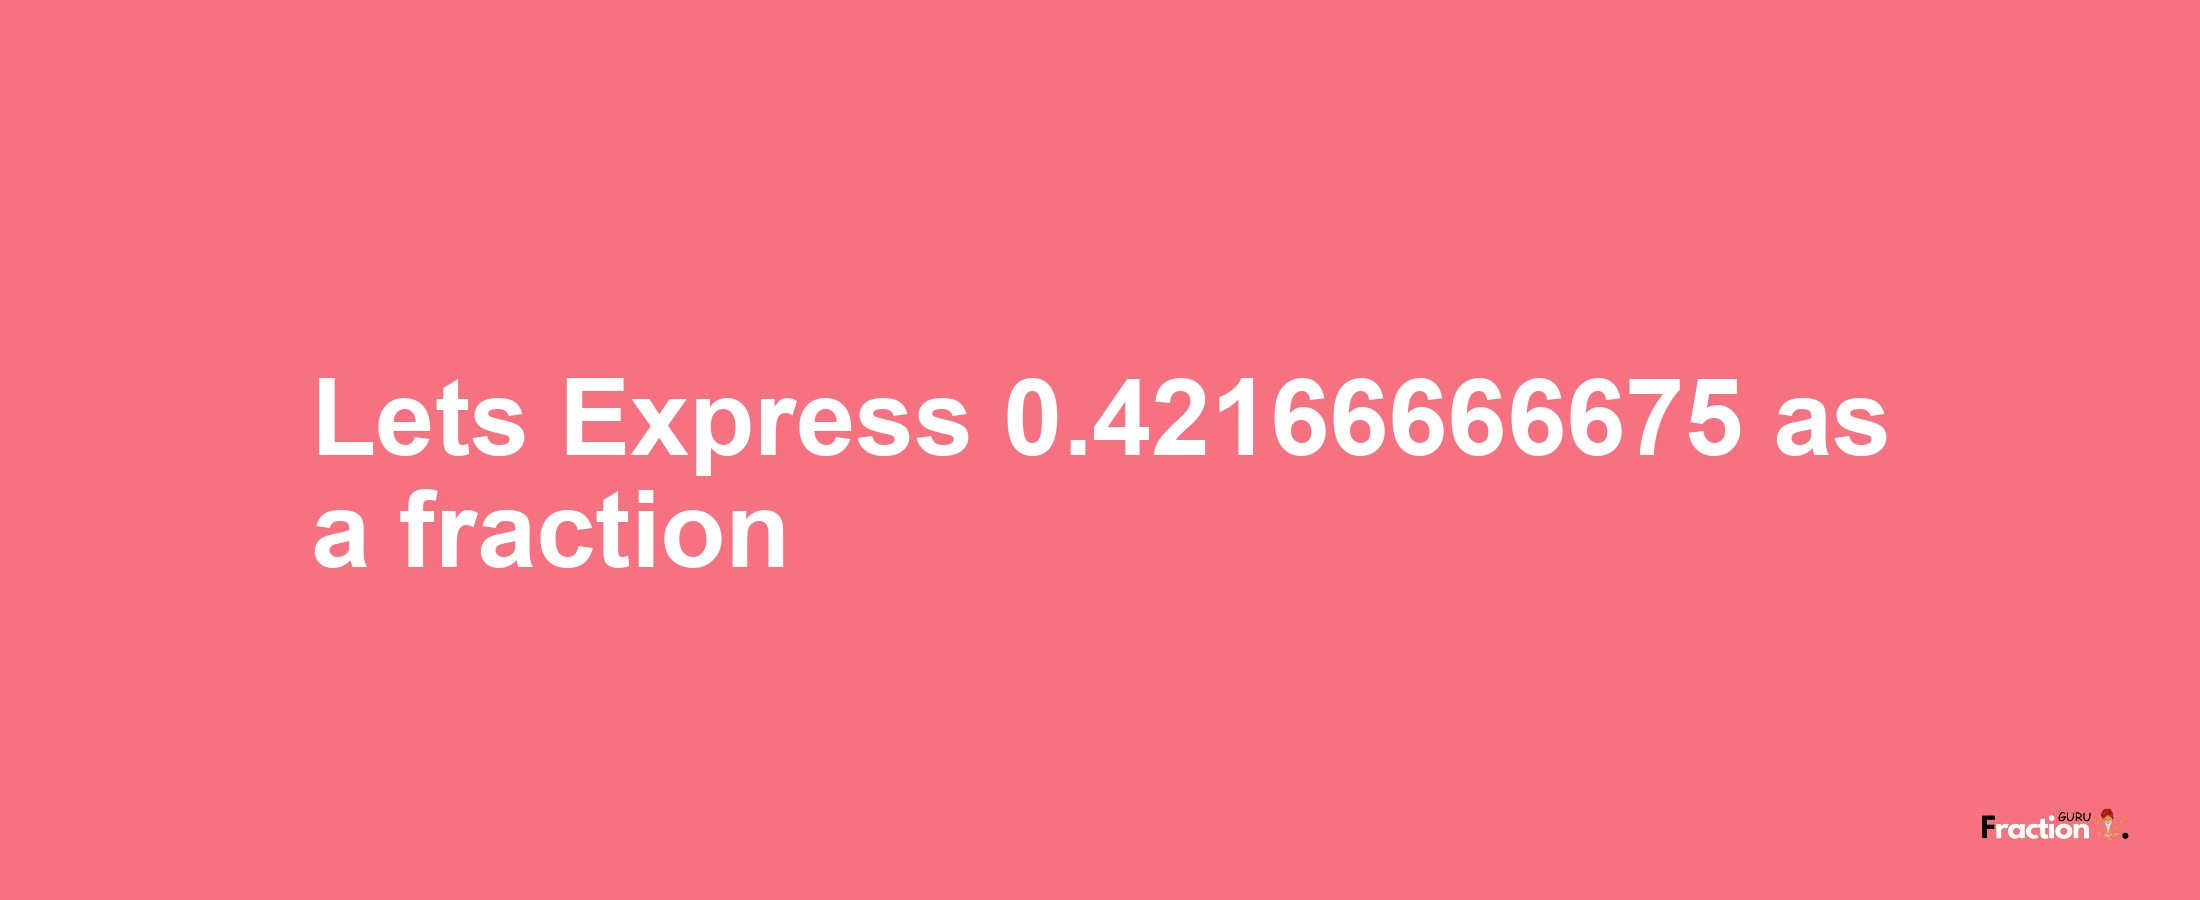 Lets Express 0.42166666675 as afraction